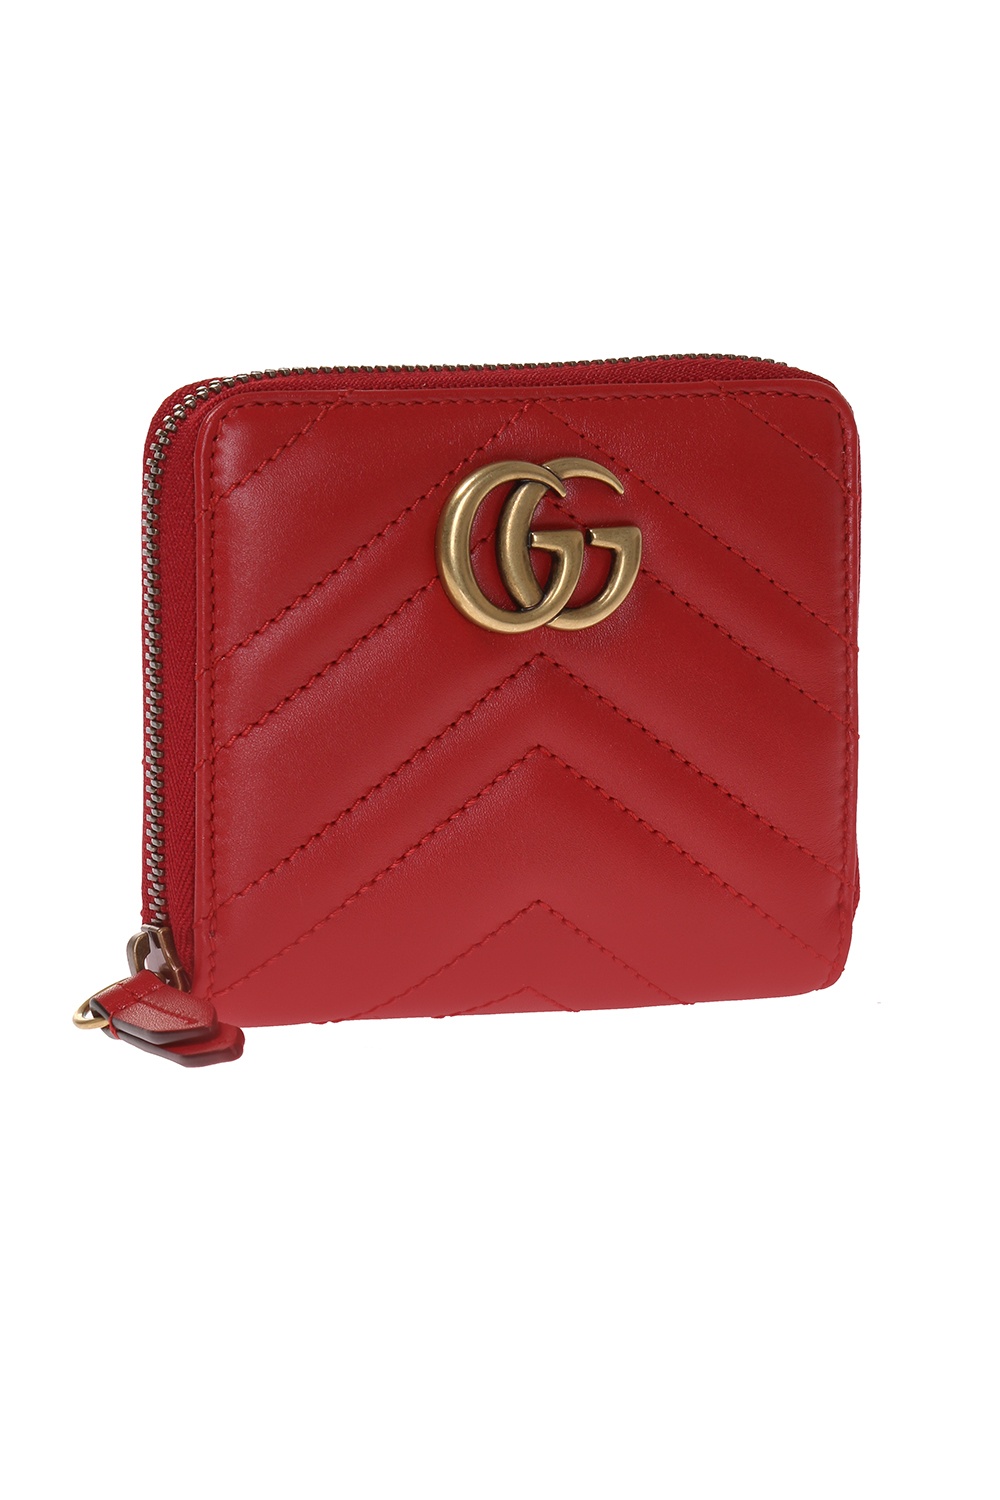 gucci gg marmont leather wallet